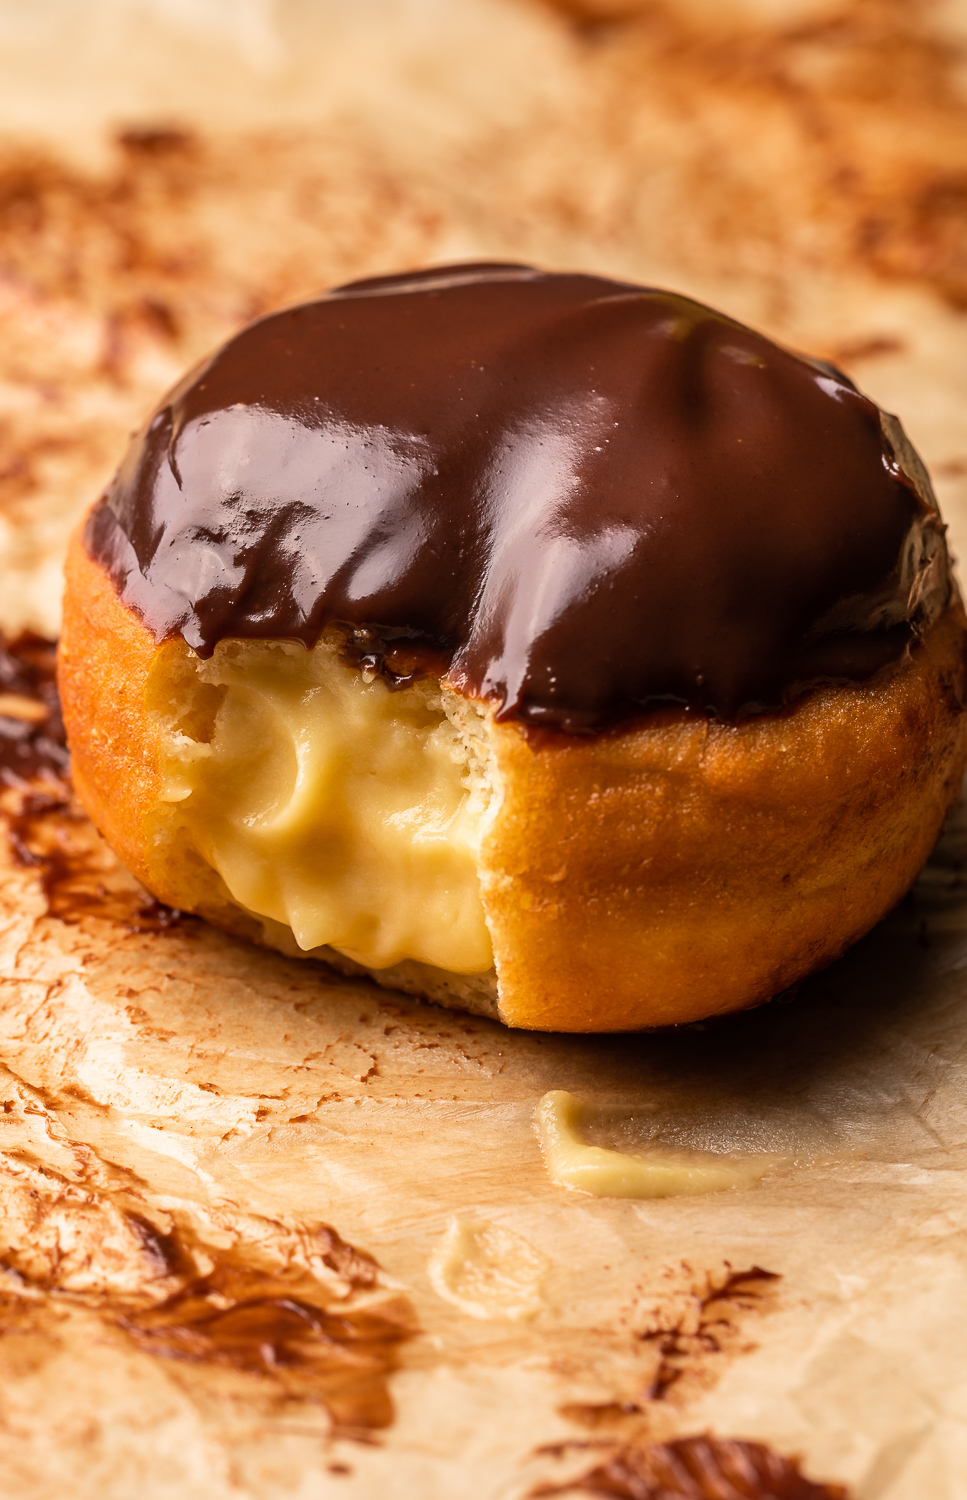 Fluffy Boston Cream Donuts are stuffed with pastry cream filling and dipped in a rich chocolate glaze! Don't let the deep frying scare you off, because this recipe is worth every step. And so much better than anything you'll get from the donut shop.